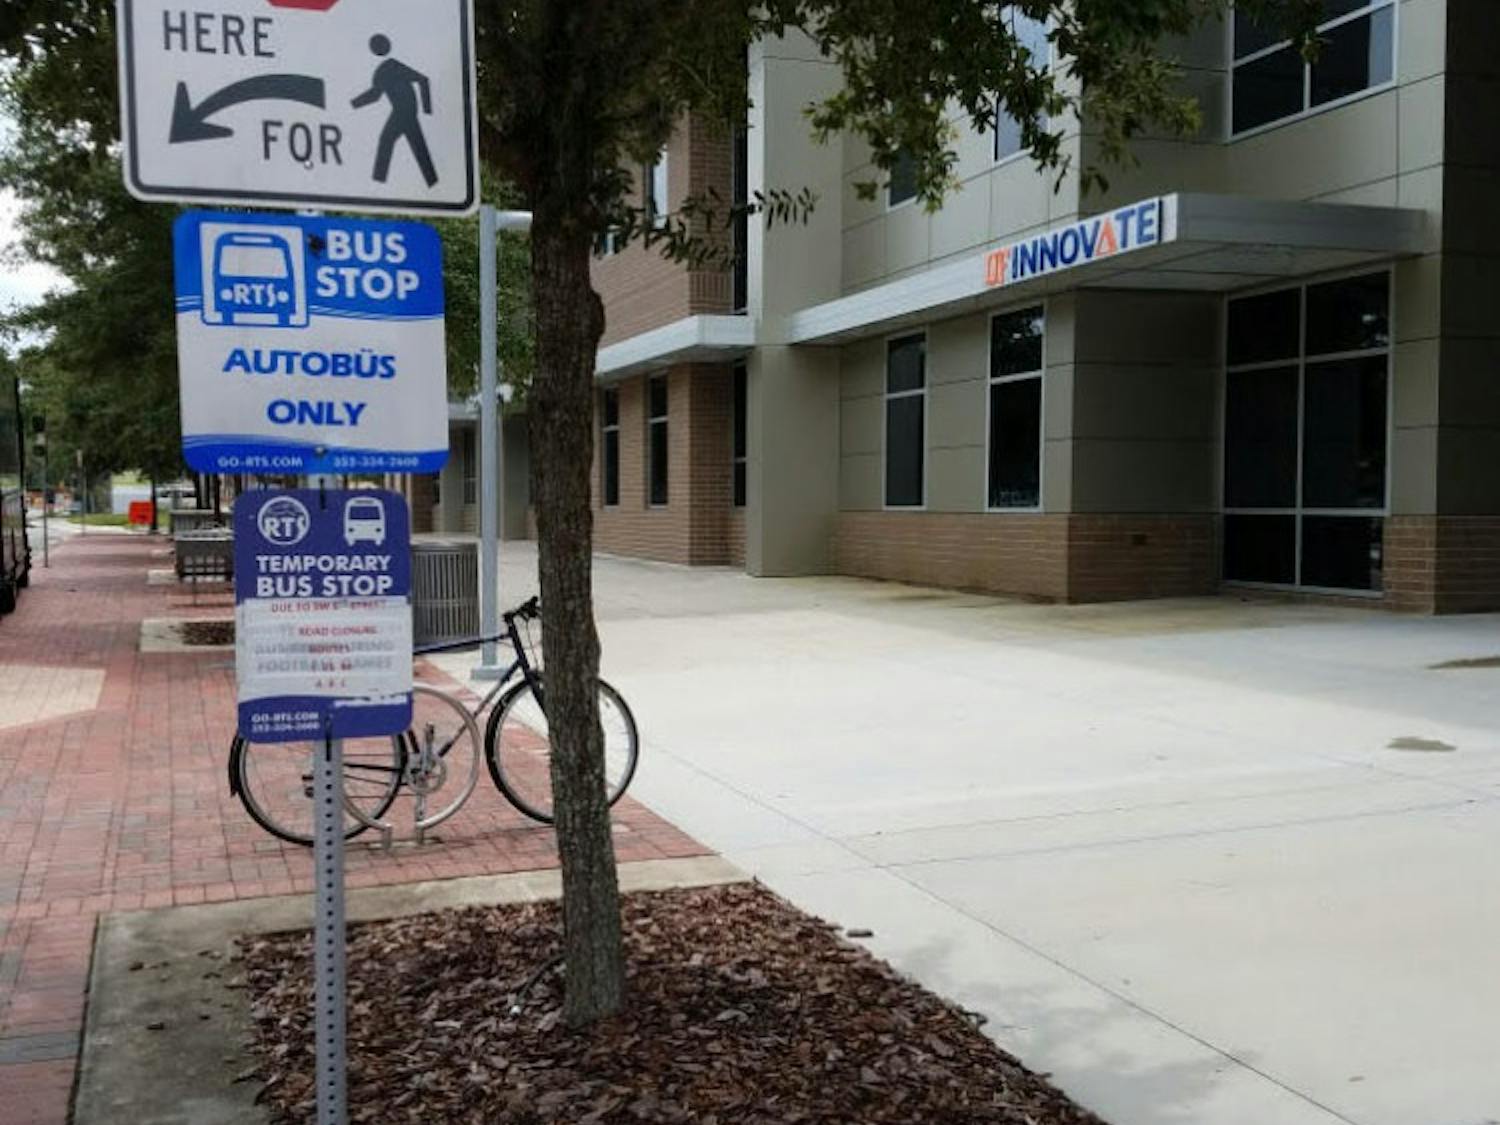 "Autobus only" signs are appearing at bus stops across Gainesville. This sign is located outside Innovation Hub on Southwest Second Avenue.